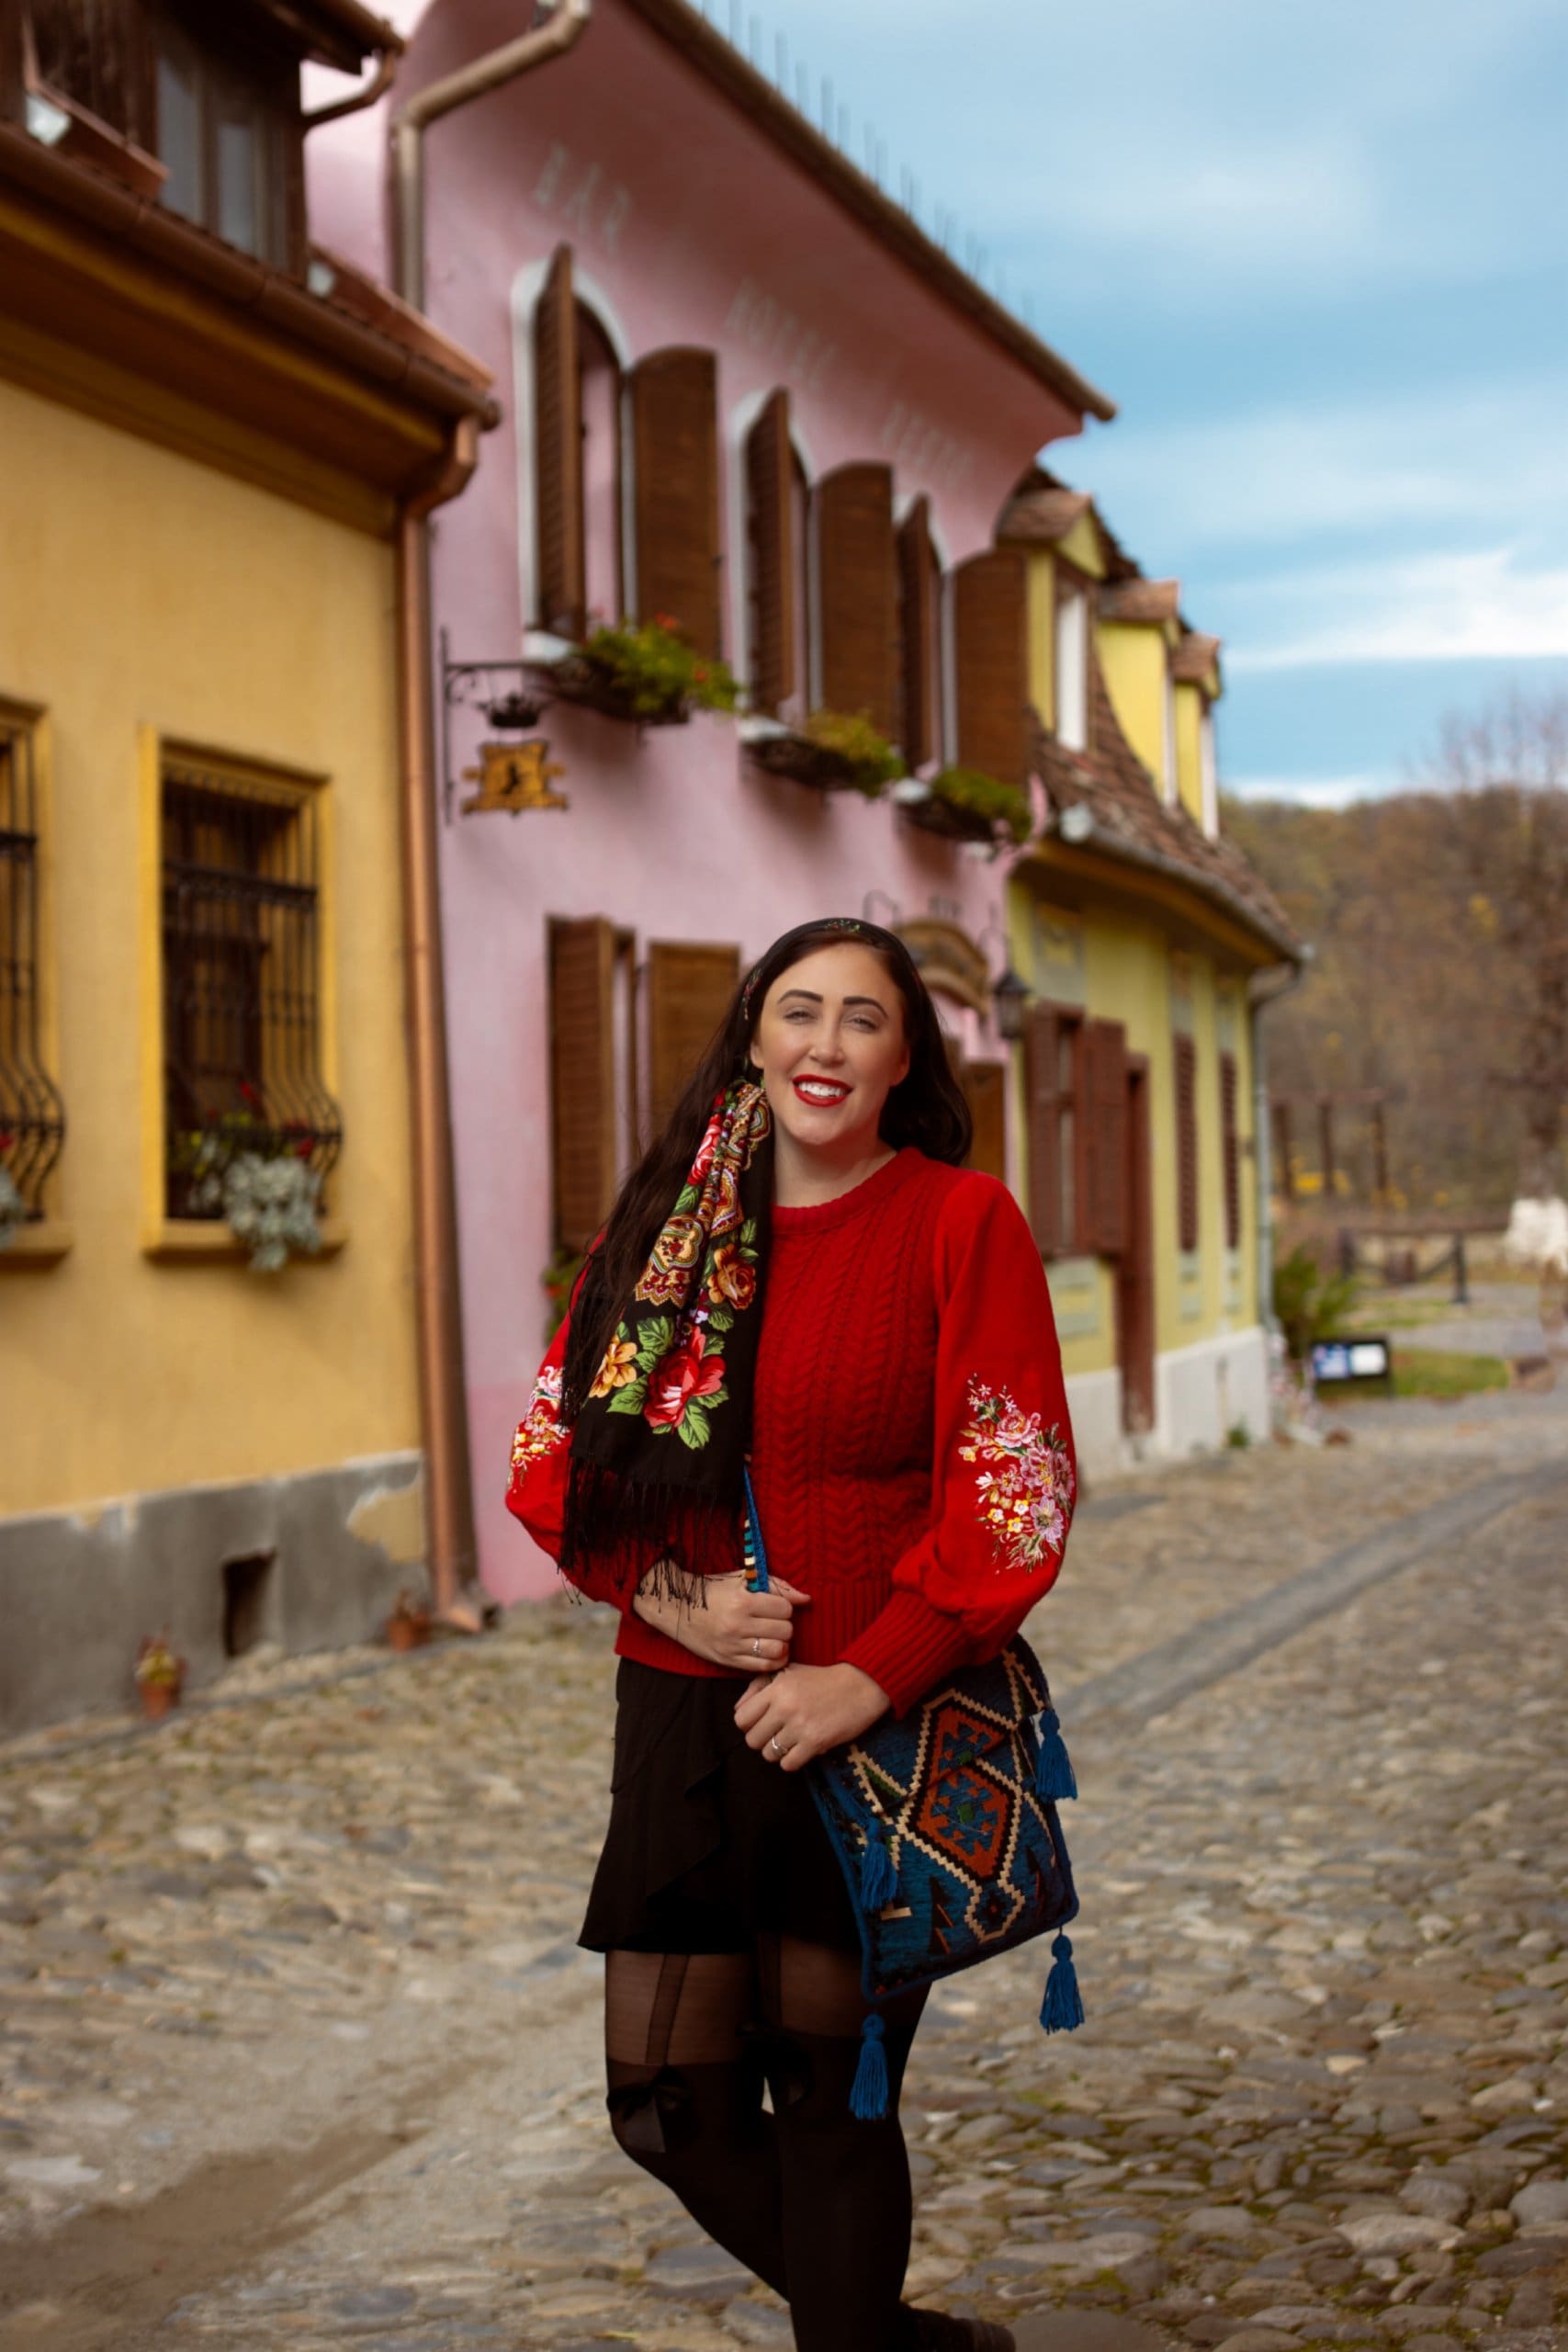 16 Best Things To Do in Sighișoara, Romania – The Colorful Medieval Village in Transylvania